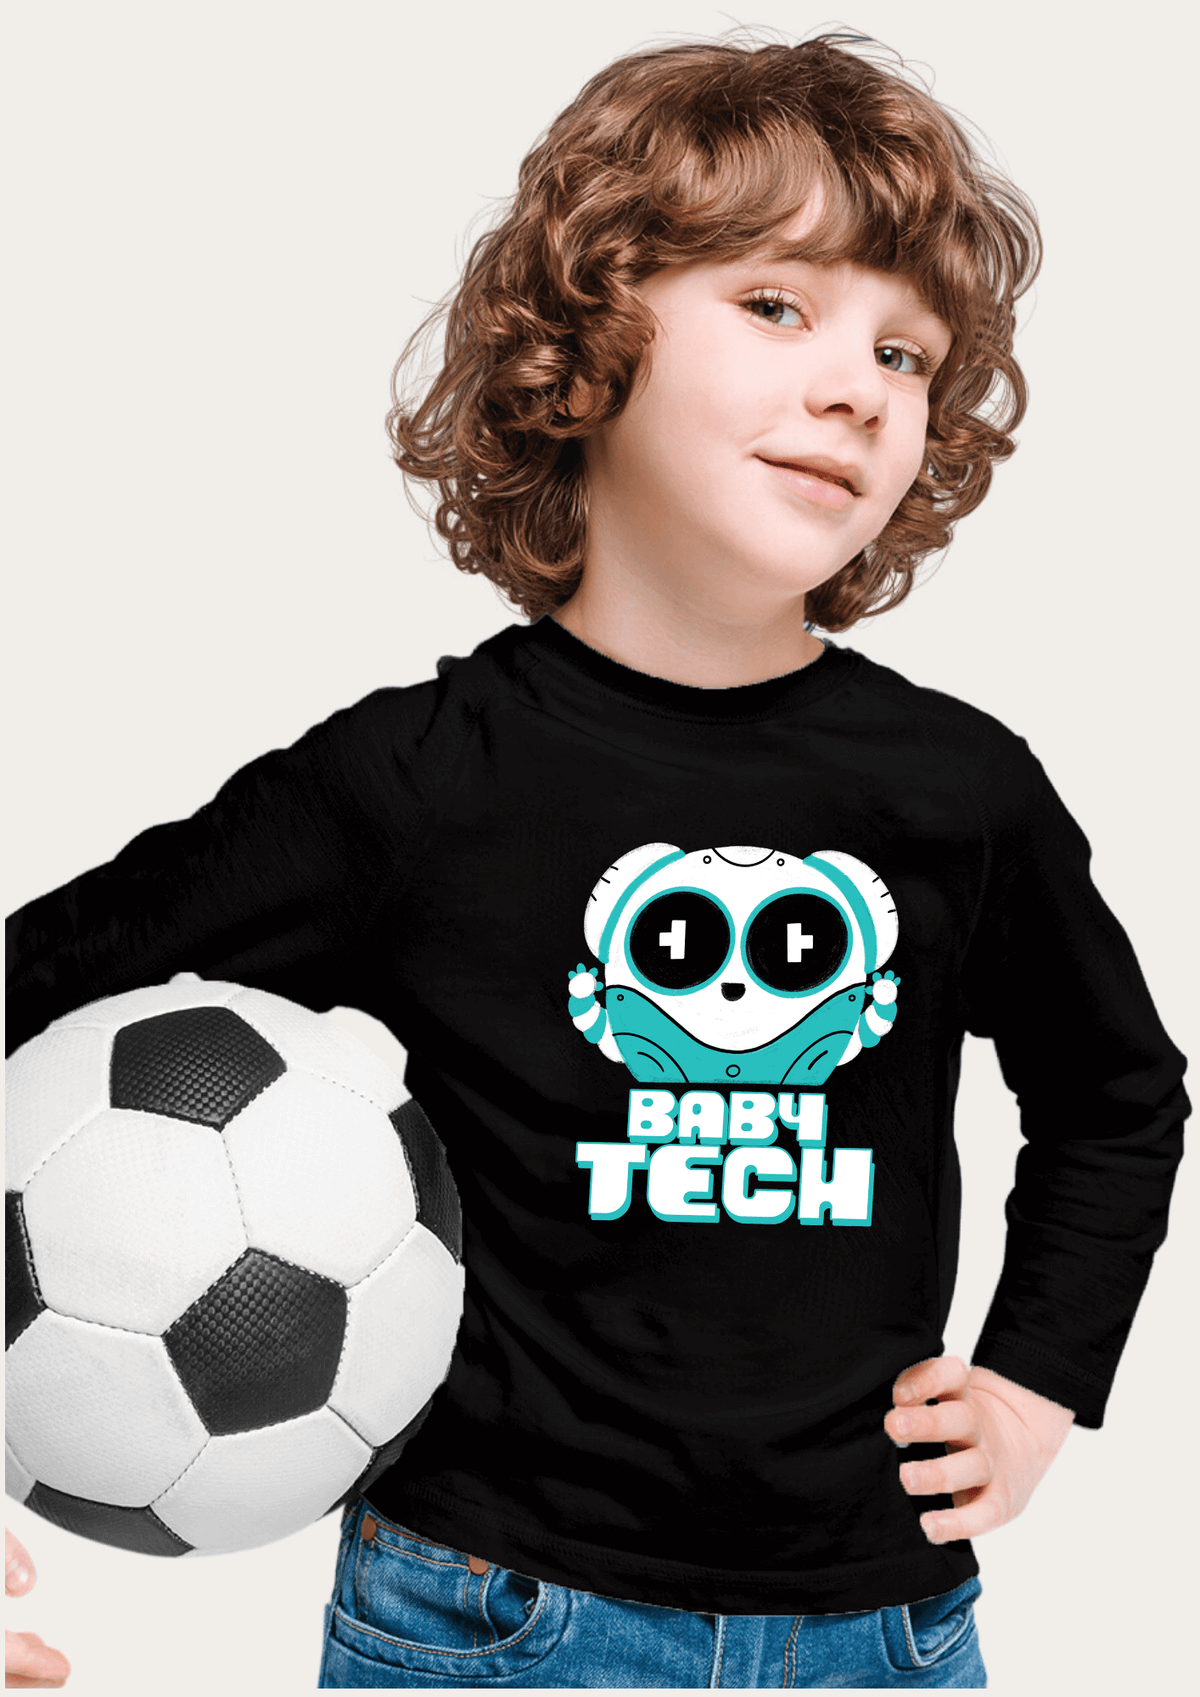 Baby Tech Printed Black Full Sleeves Kids T-shirt By Offmint